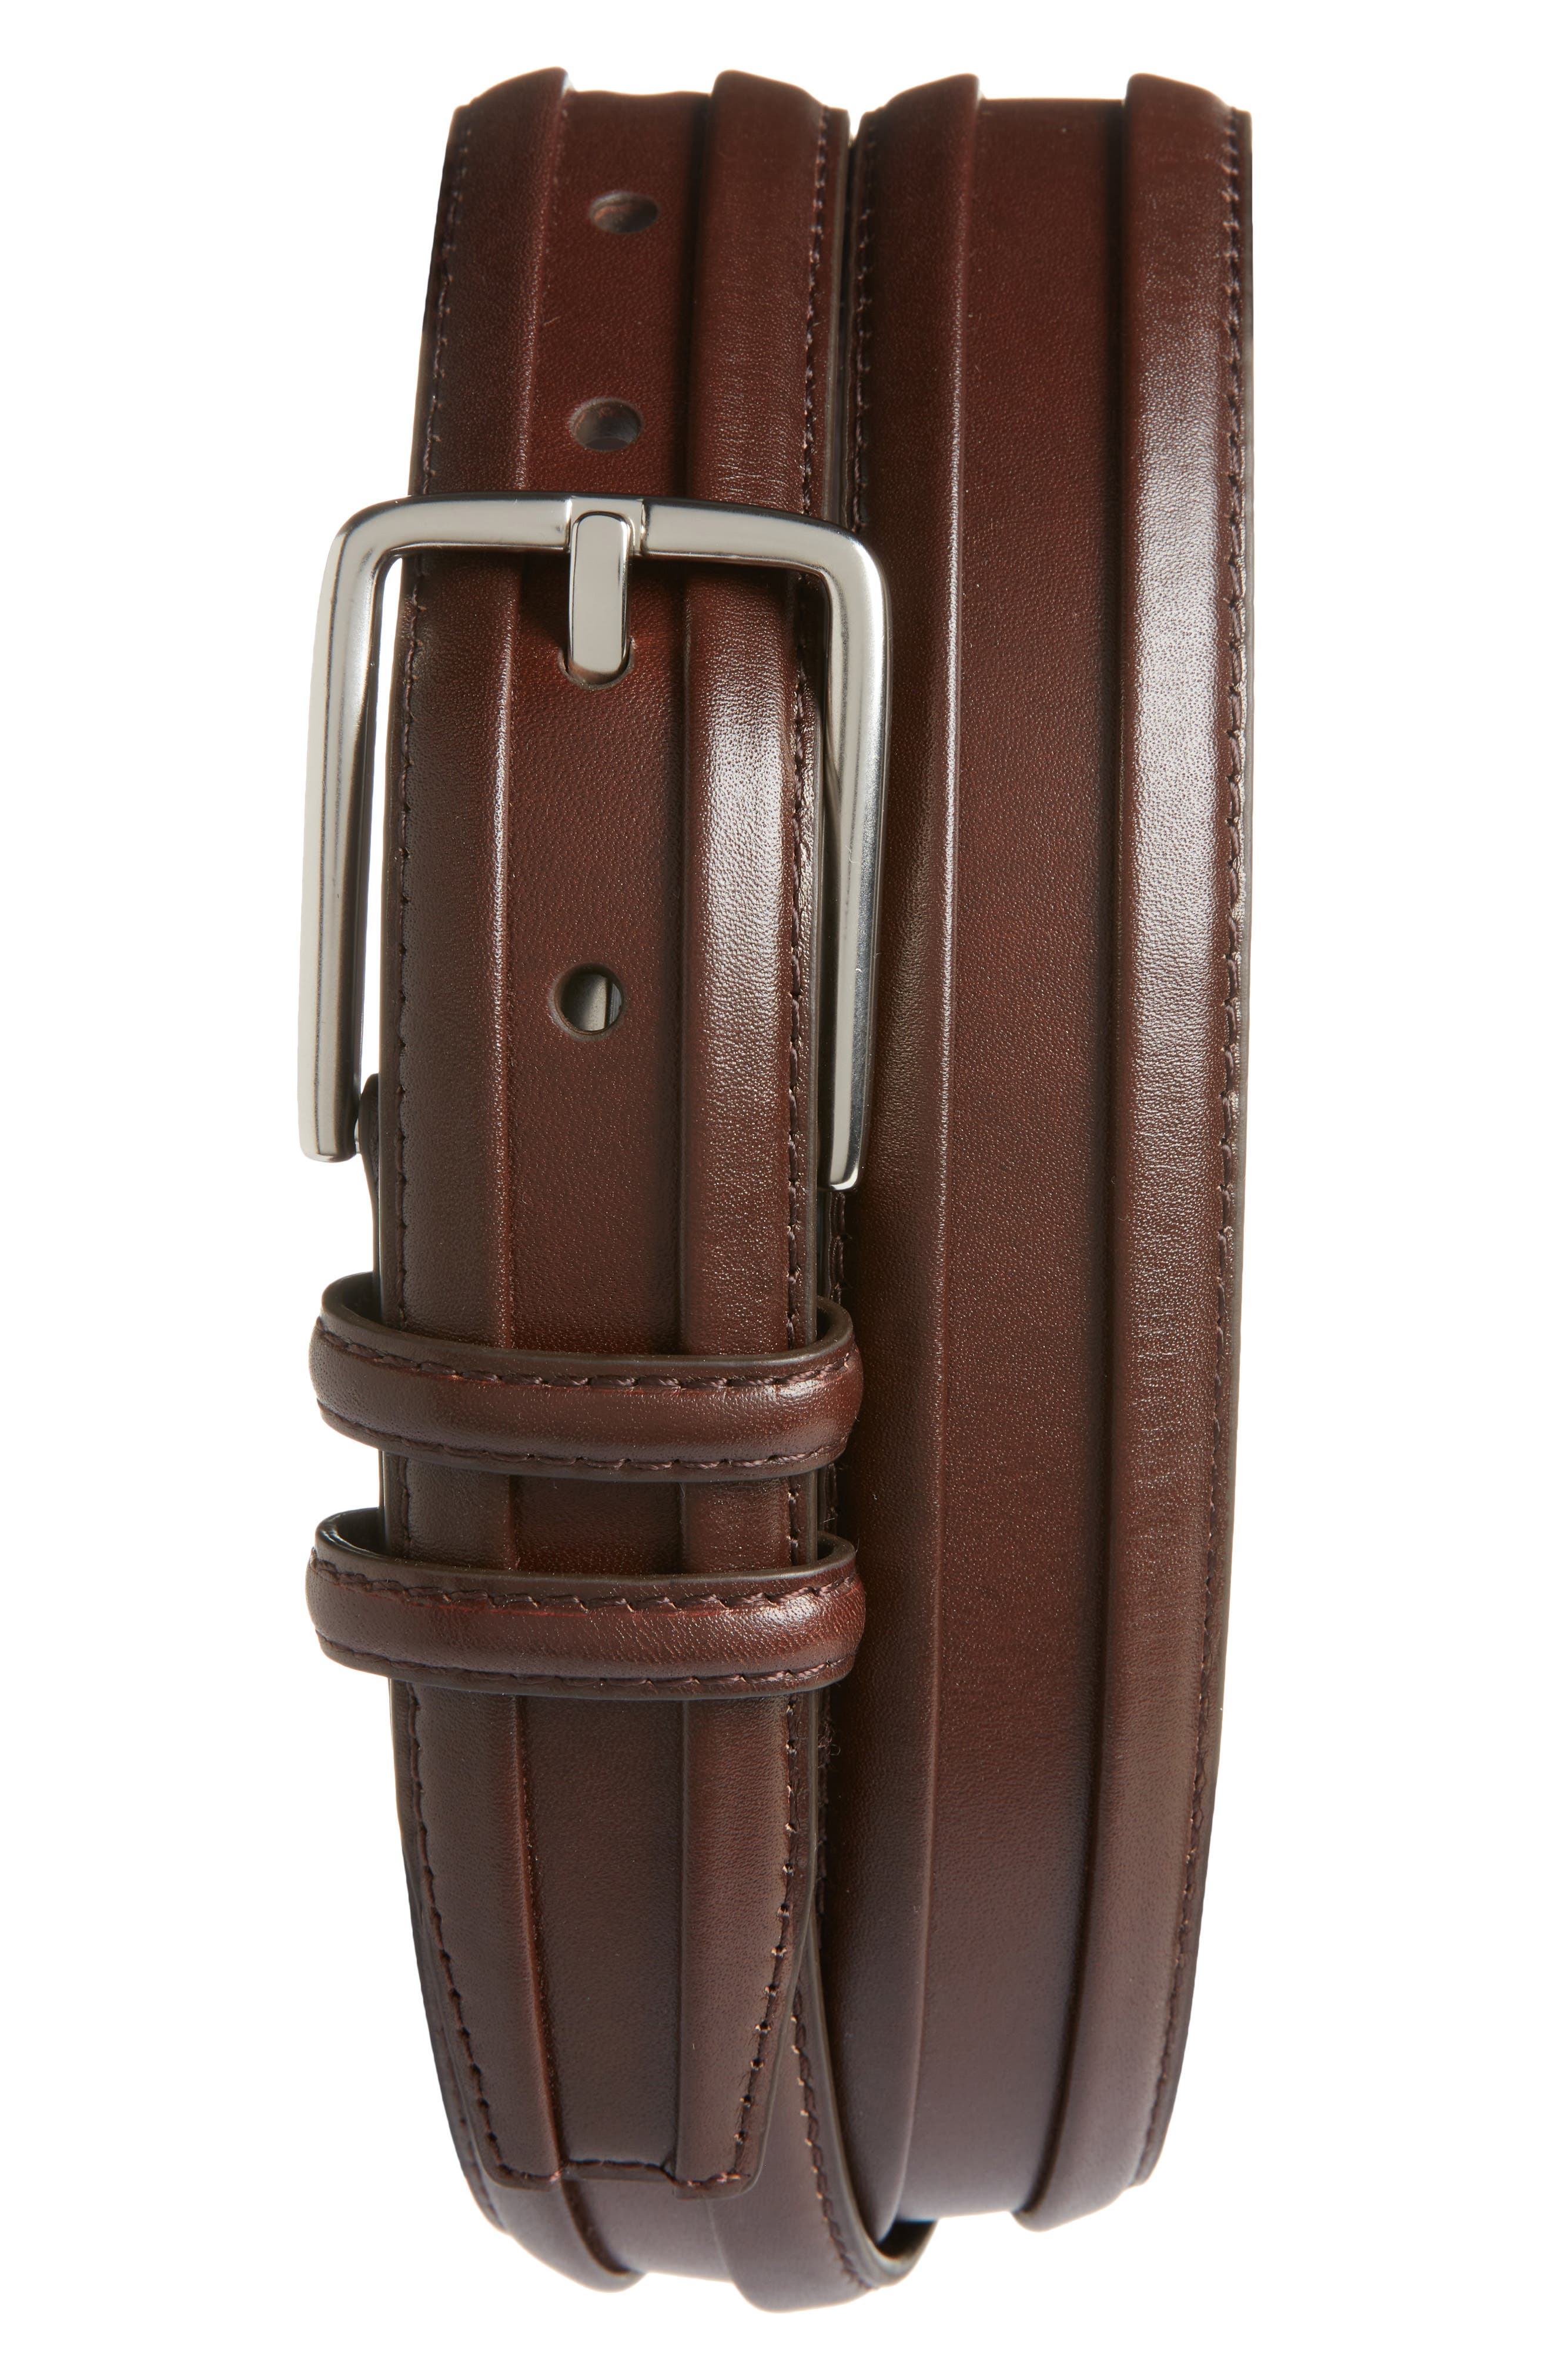 Accessories Belts Leather Belts LTB Leather Belt brown-bronze-colored casual look 